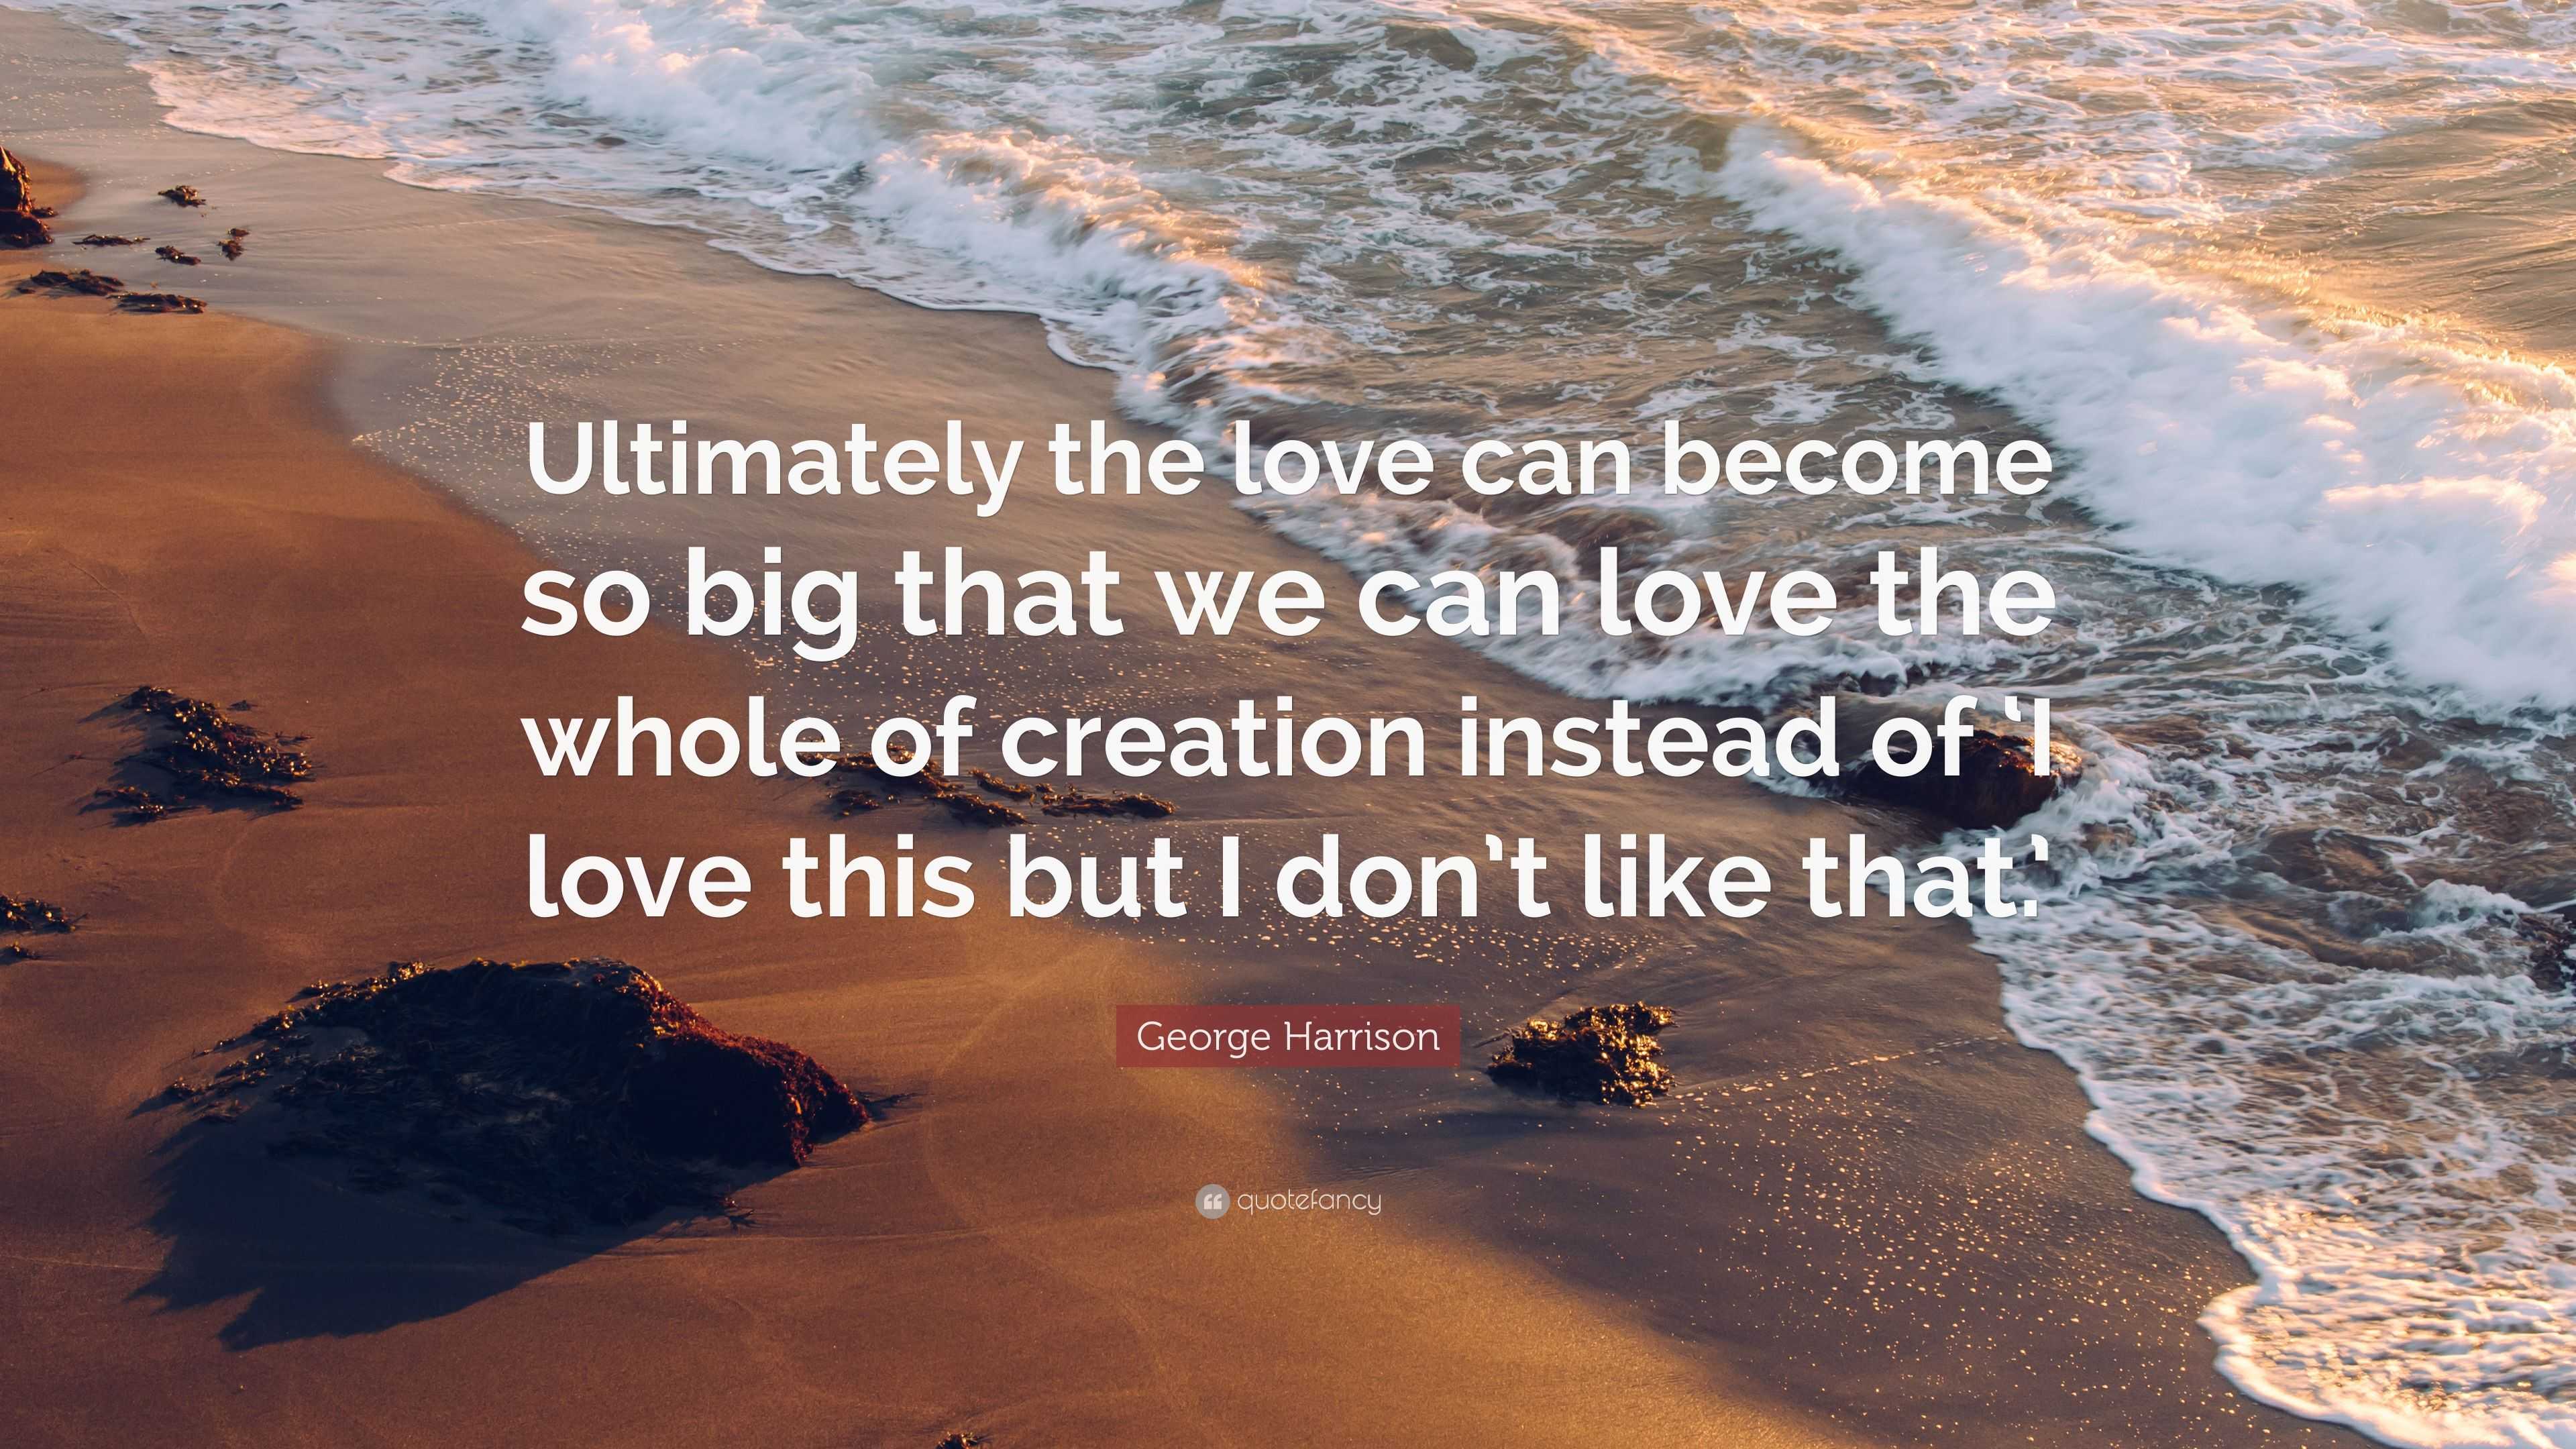 George Harrison Quote: “Ultimately the love can become so big that we ...